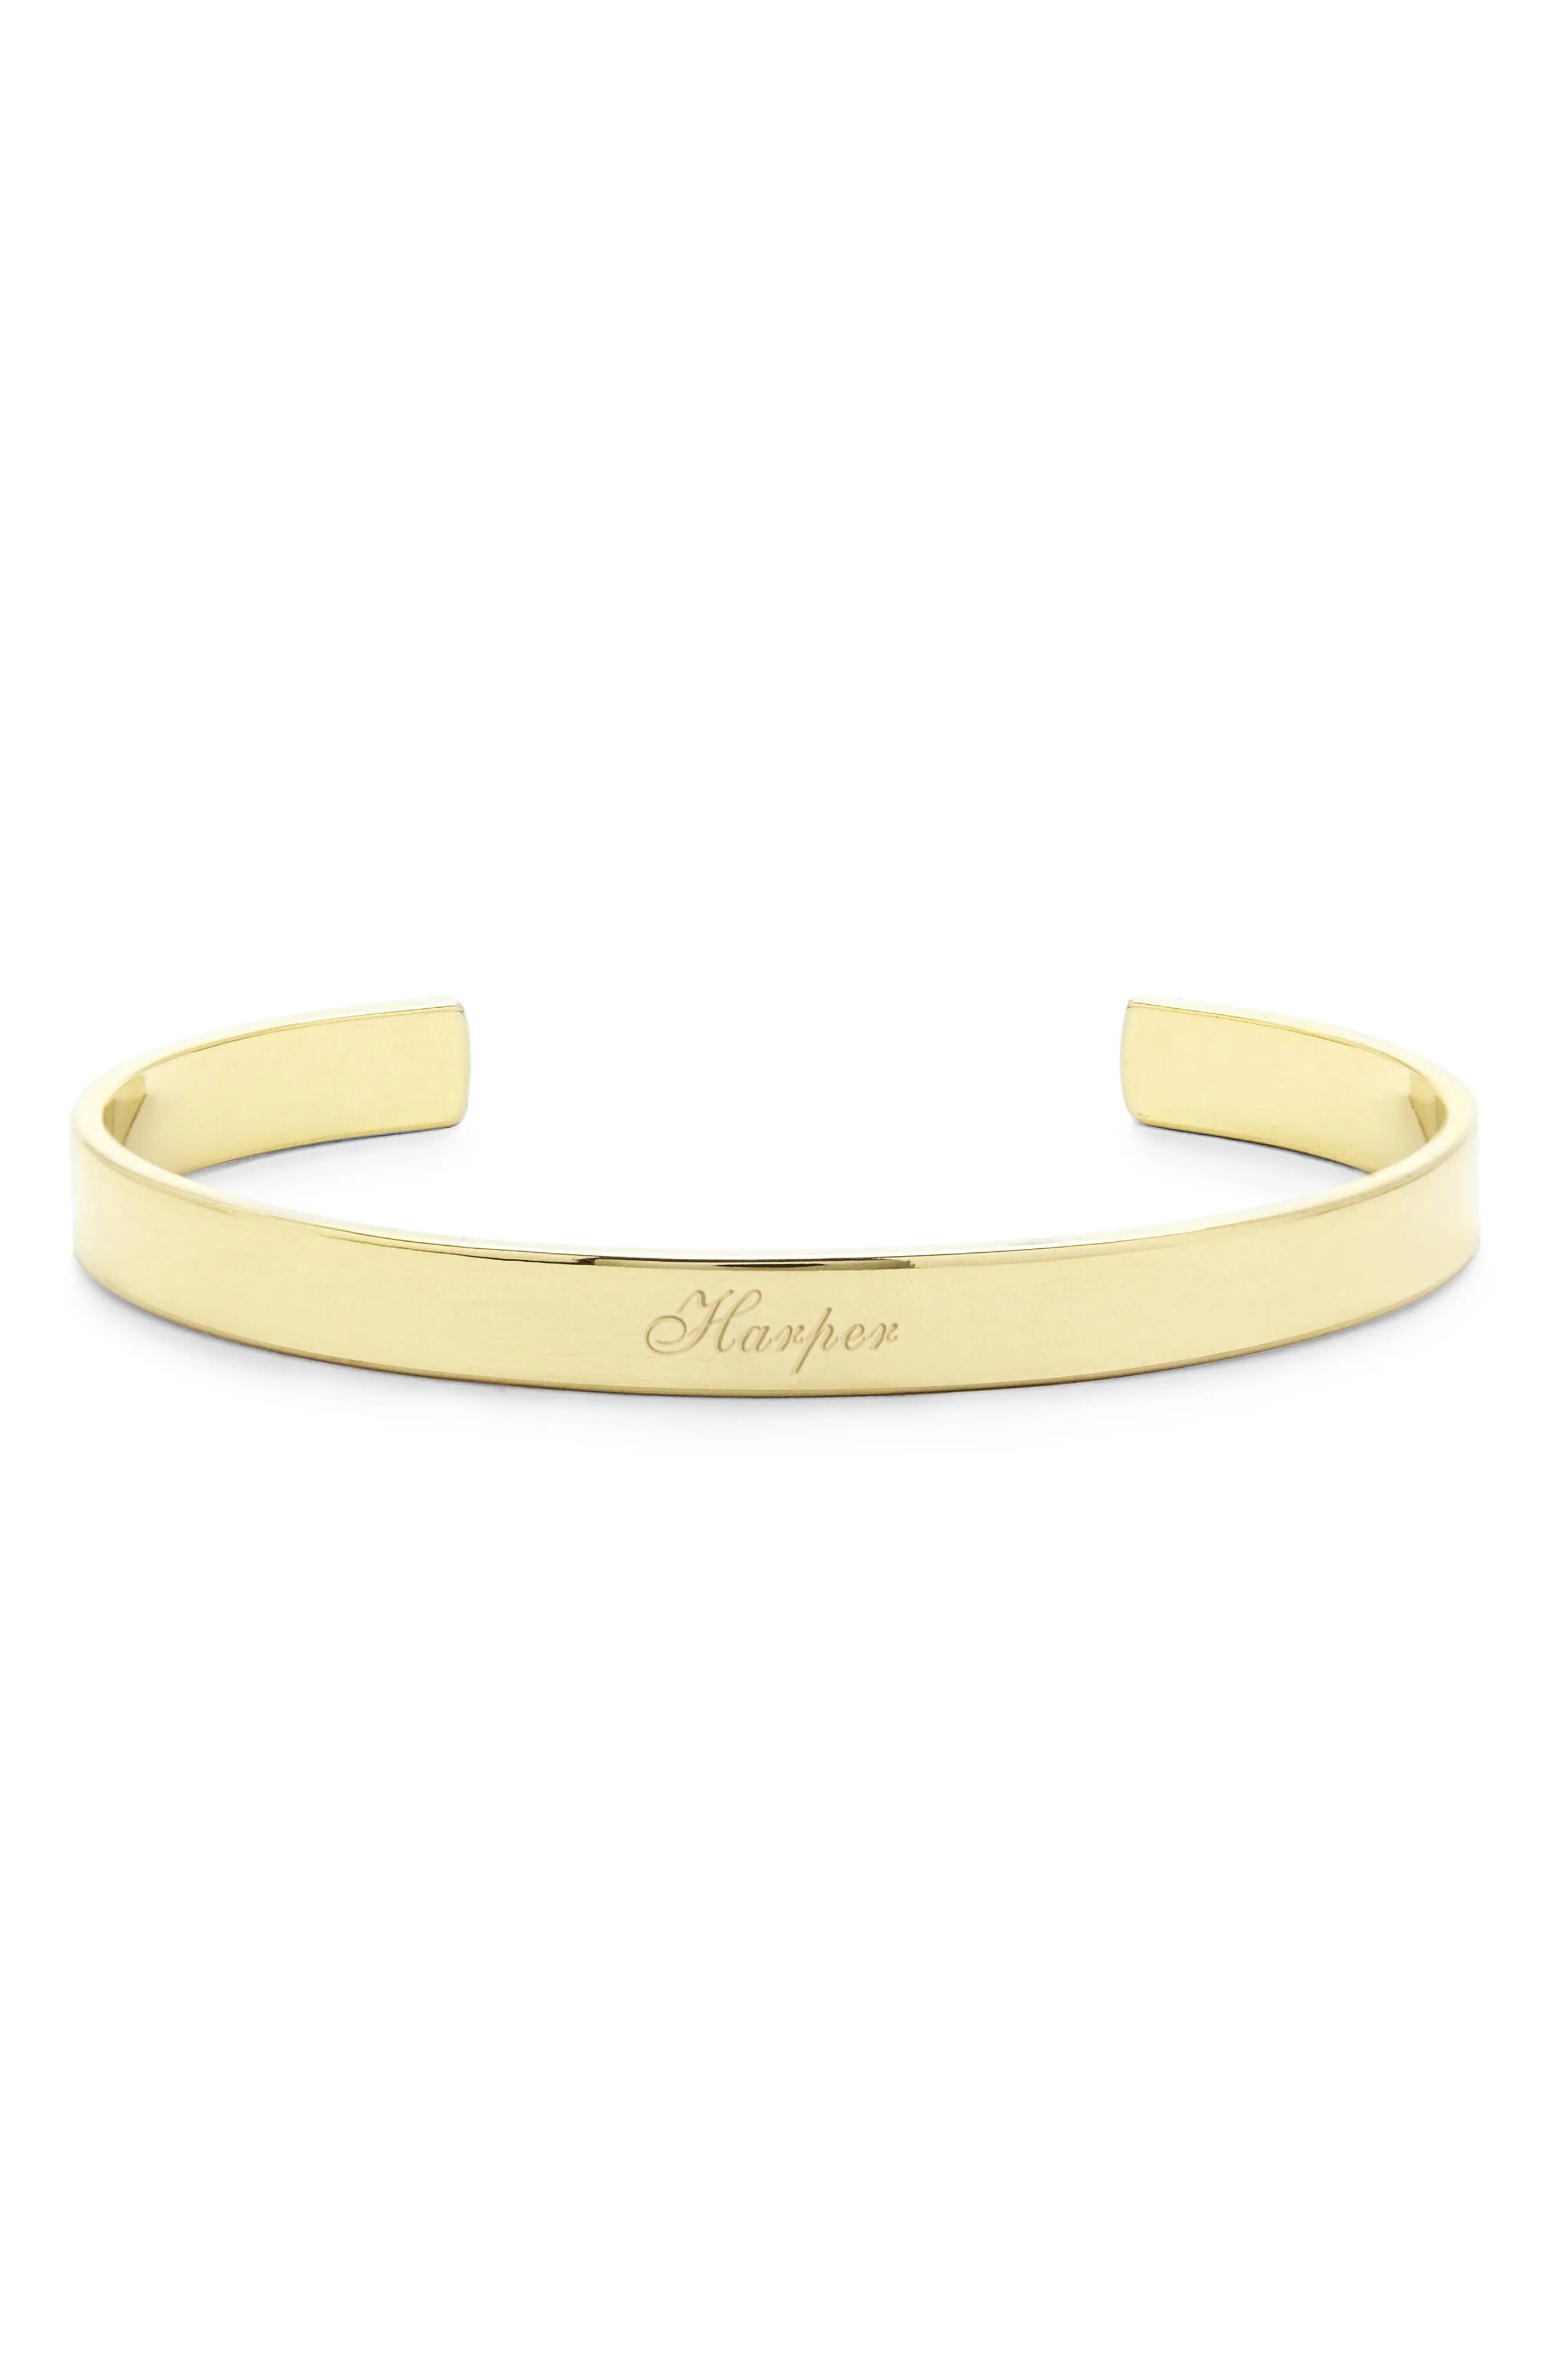 Brook and York Personalized Name Cuff in Gold at Nordstrom | Nordstrom